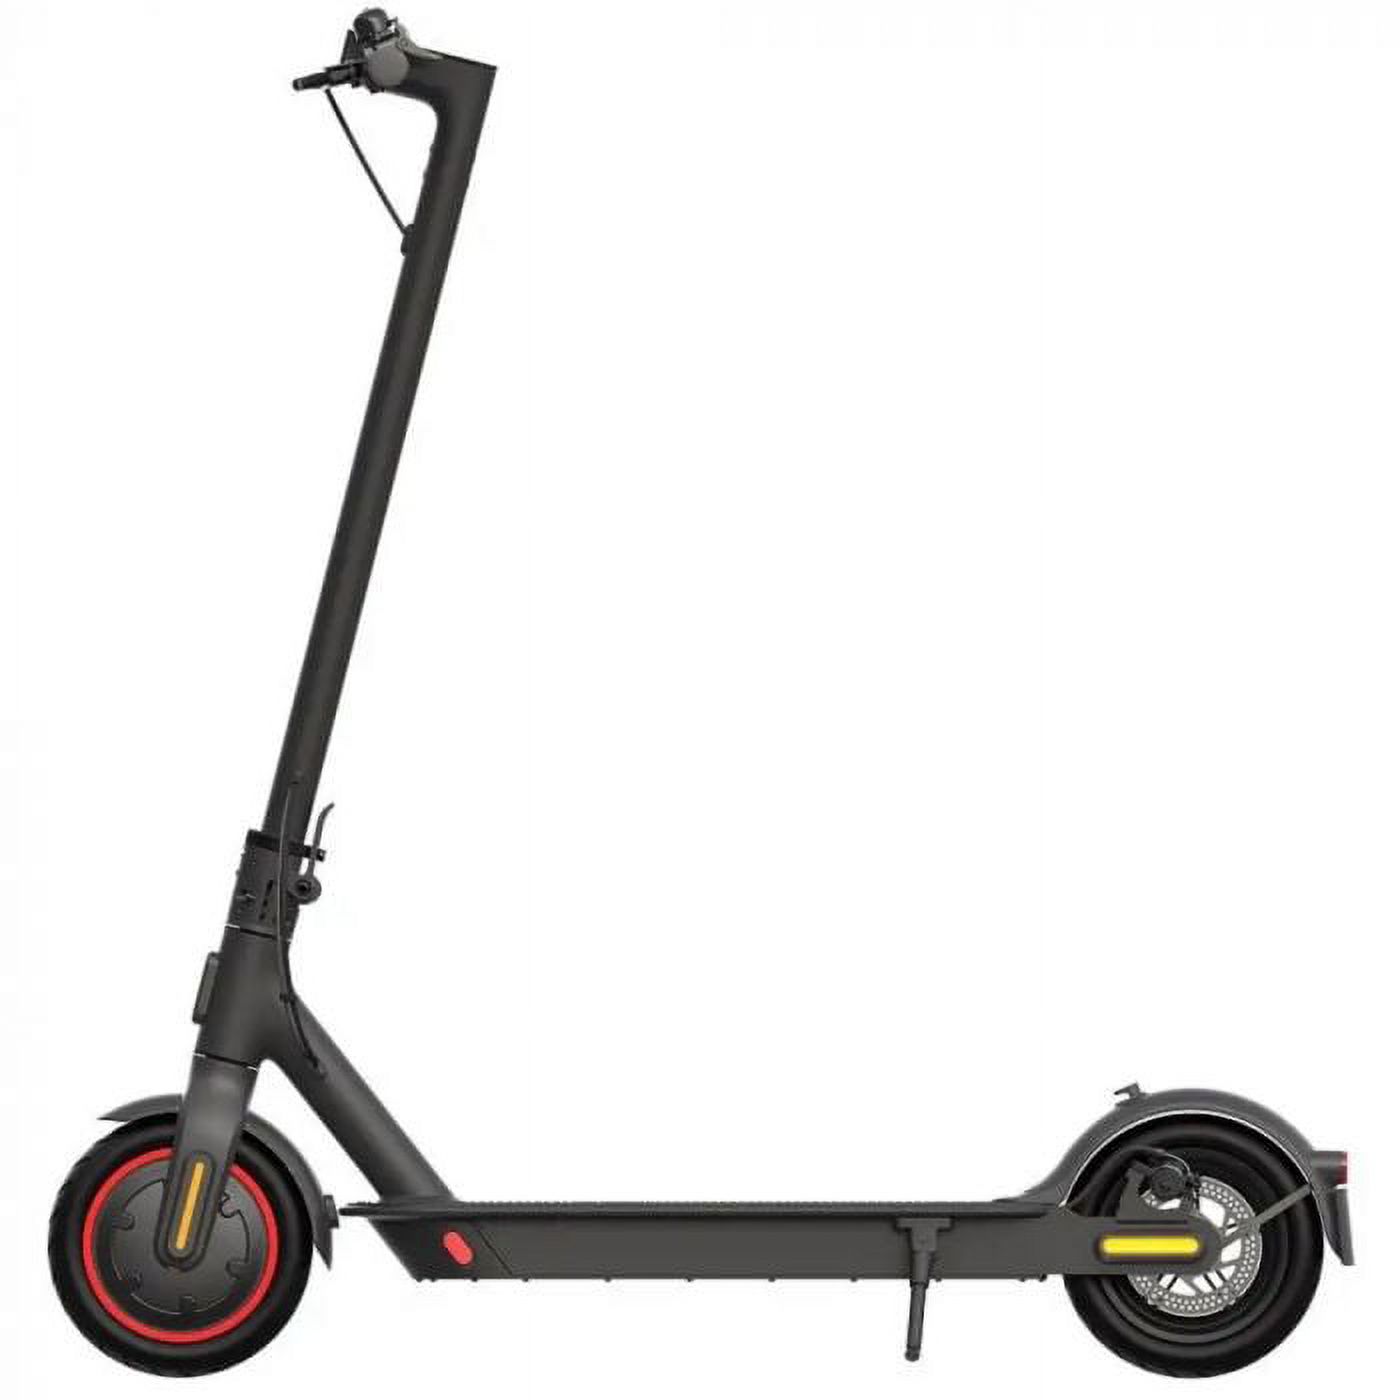 Xiaomi Mi Electric Scooter PRO 2 - image 4 of 7